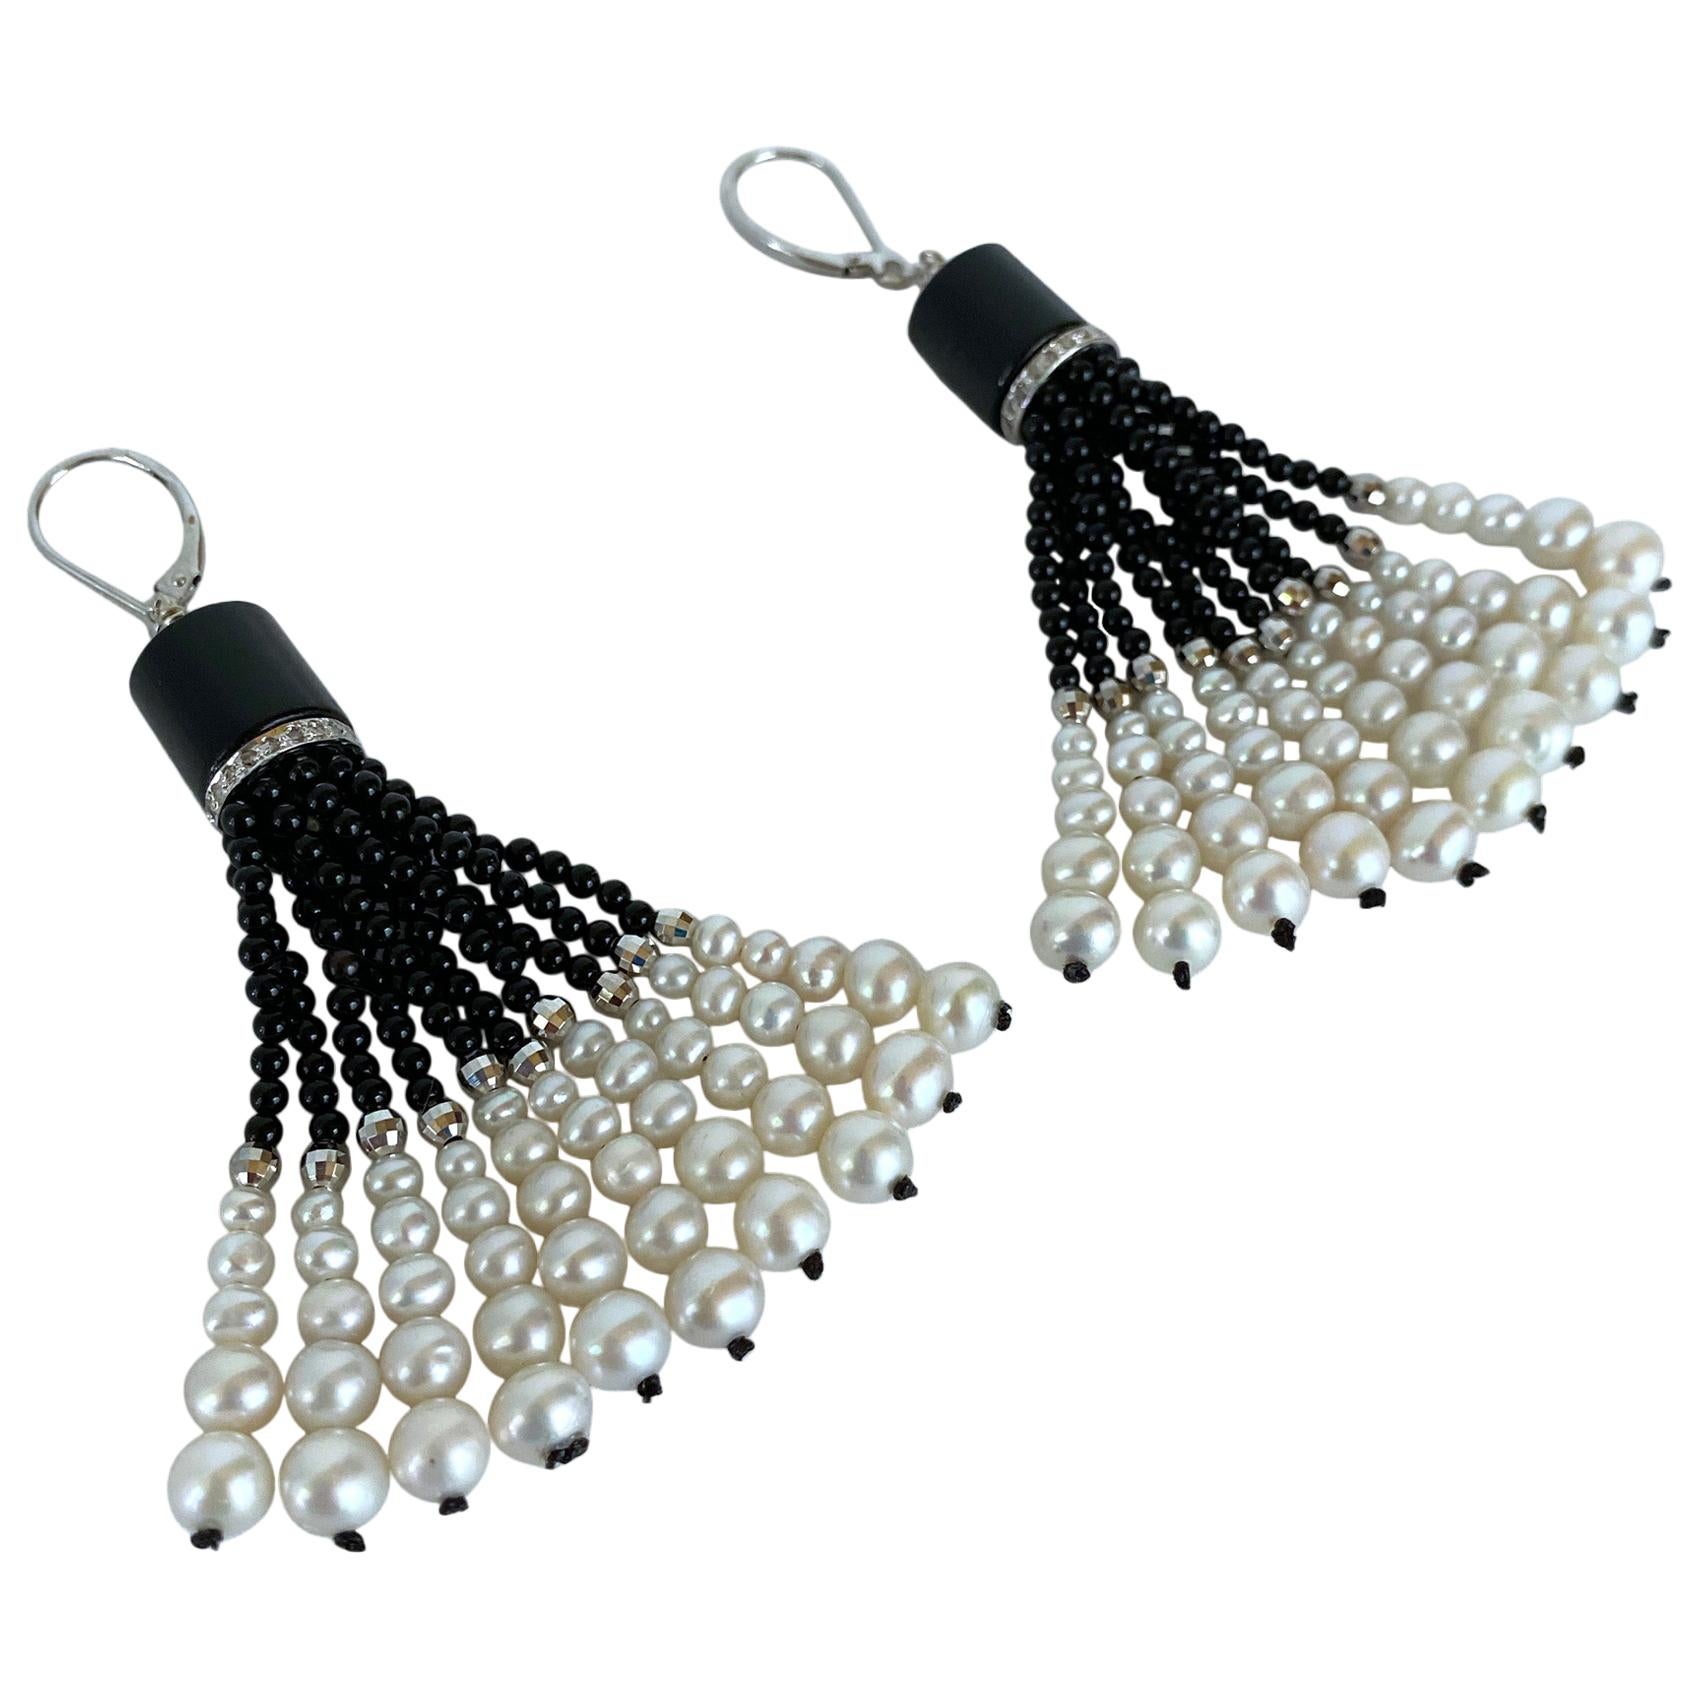 Marina J. Art Deco Inspired Earrings With Pearls, Black Onyx, Diamonds & Gold For Sale